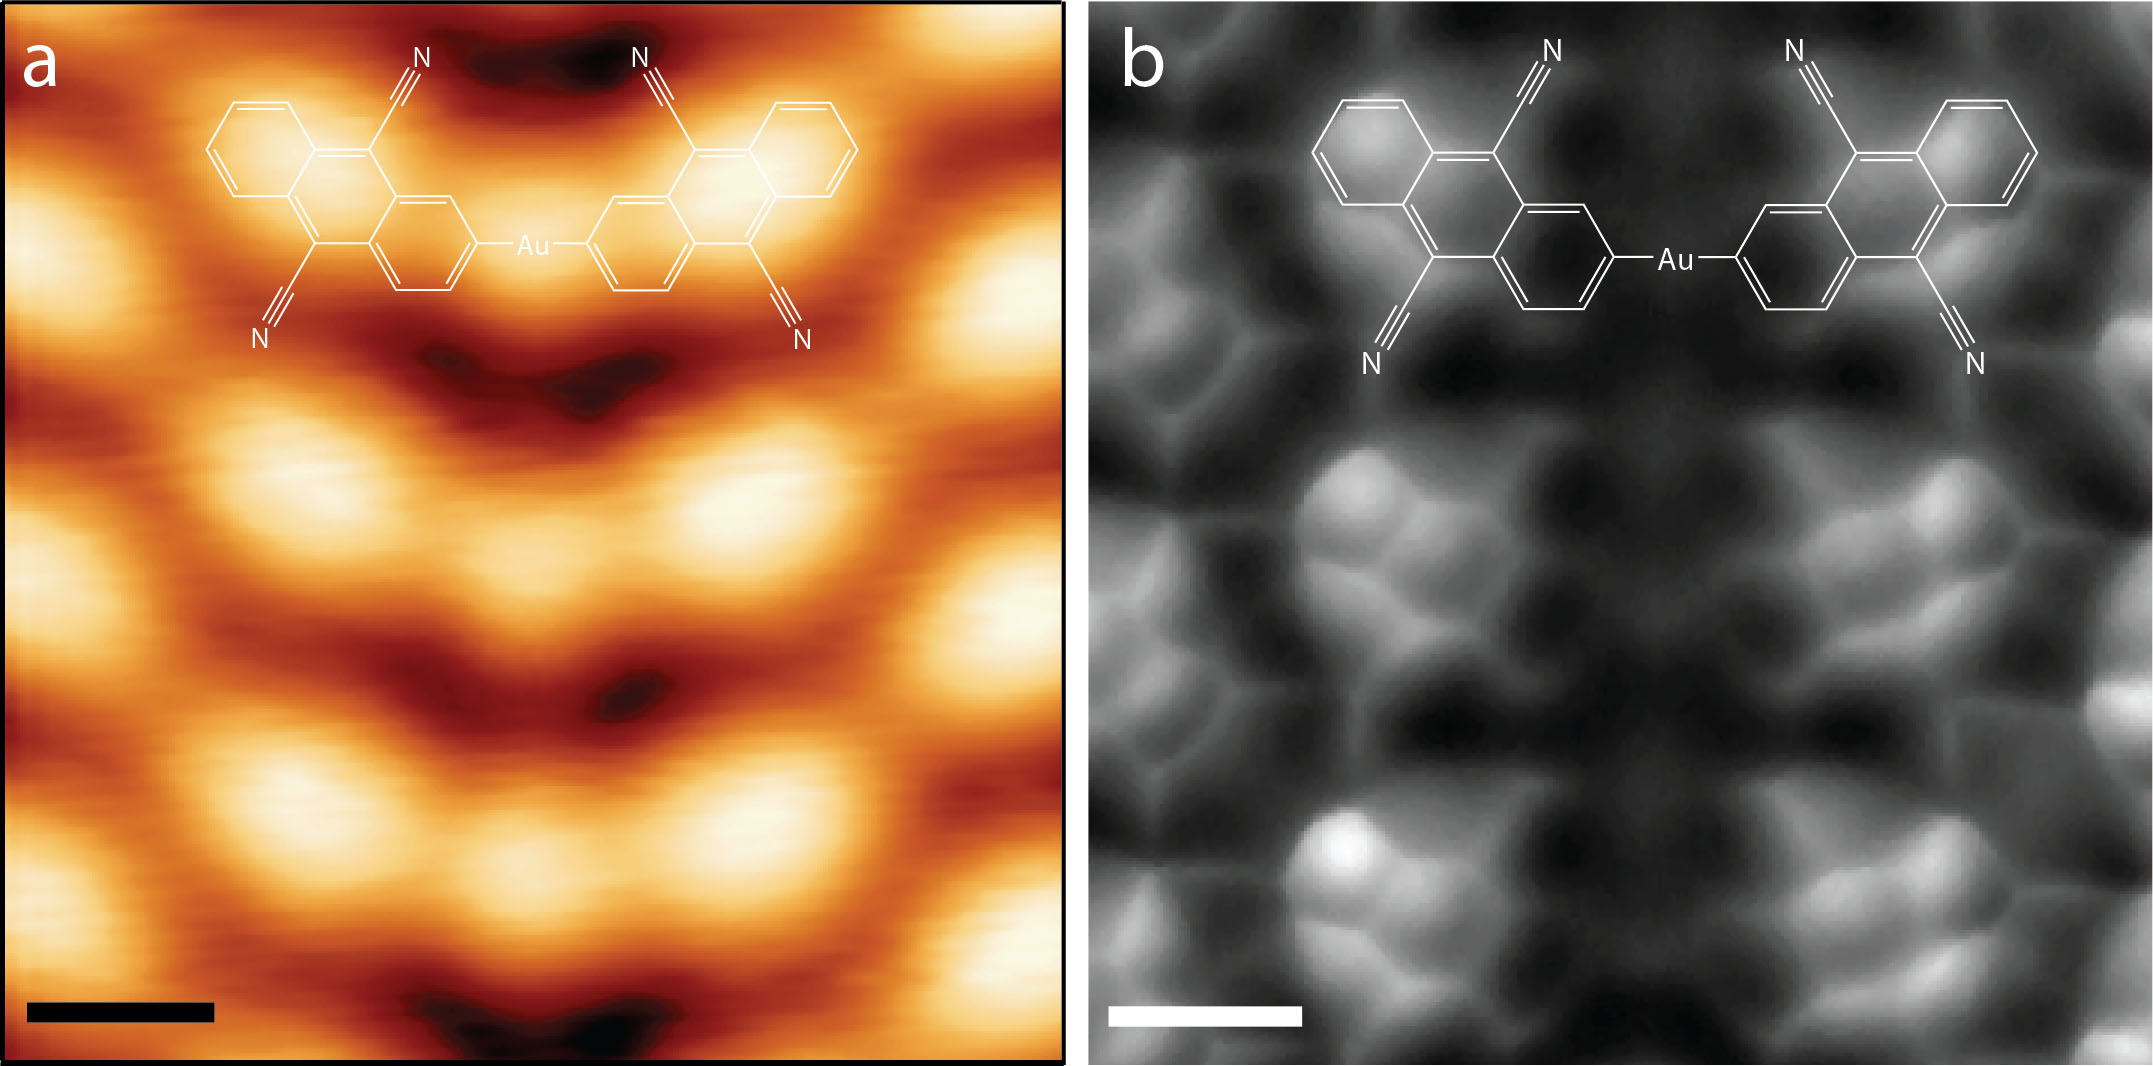 Scanning tunnelling microscopy (a) and non-contact atomic force microscopy (b) at Monash University of bonded DCA molecules and Au atoms allow direct observation of the chemical structure with covalent C-Au bonds